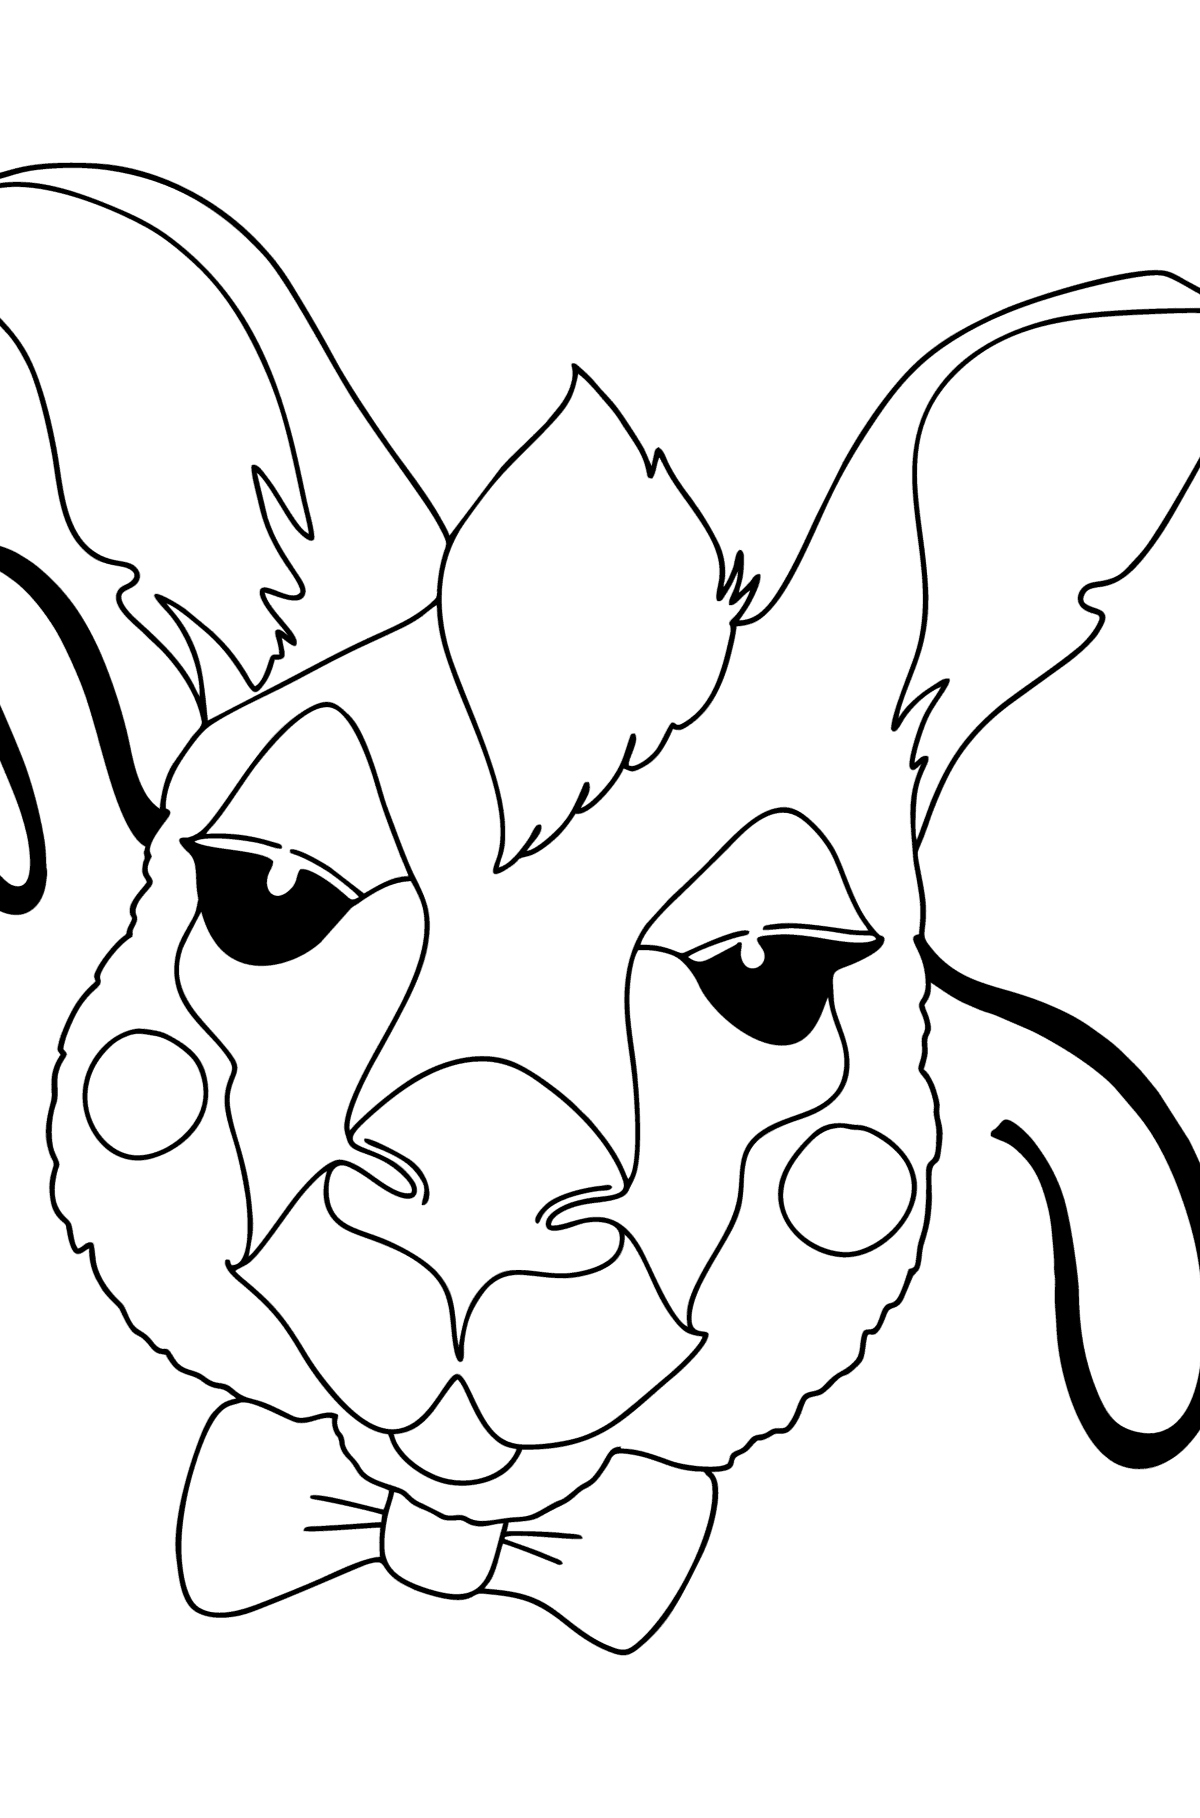 Kangaroo Mask coloring page - Coloring Pages for Kids